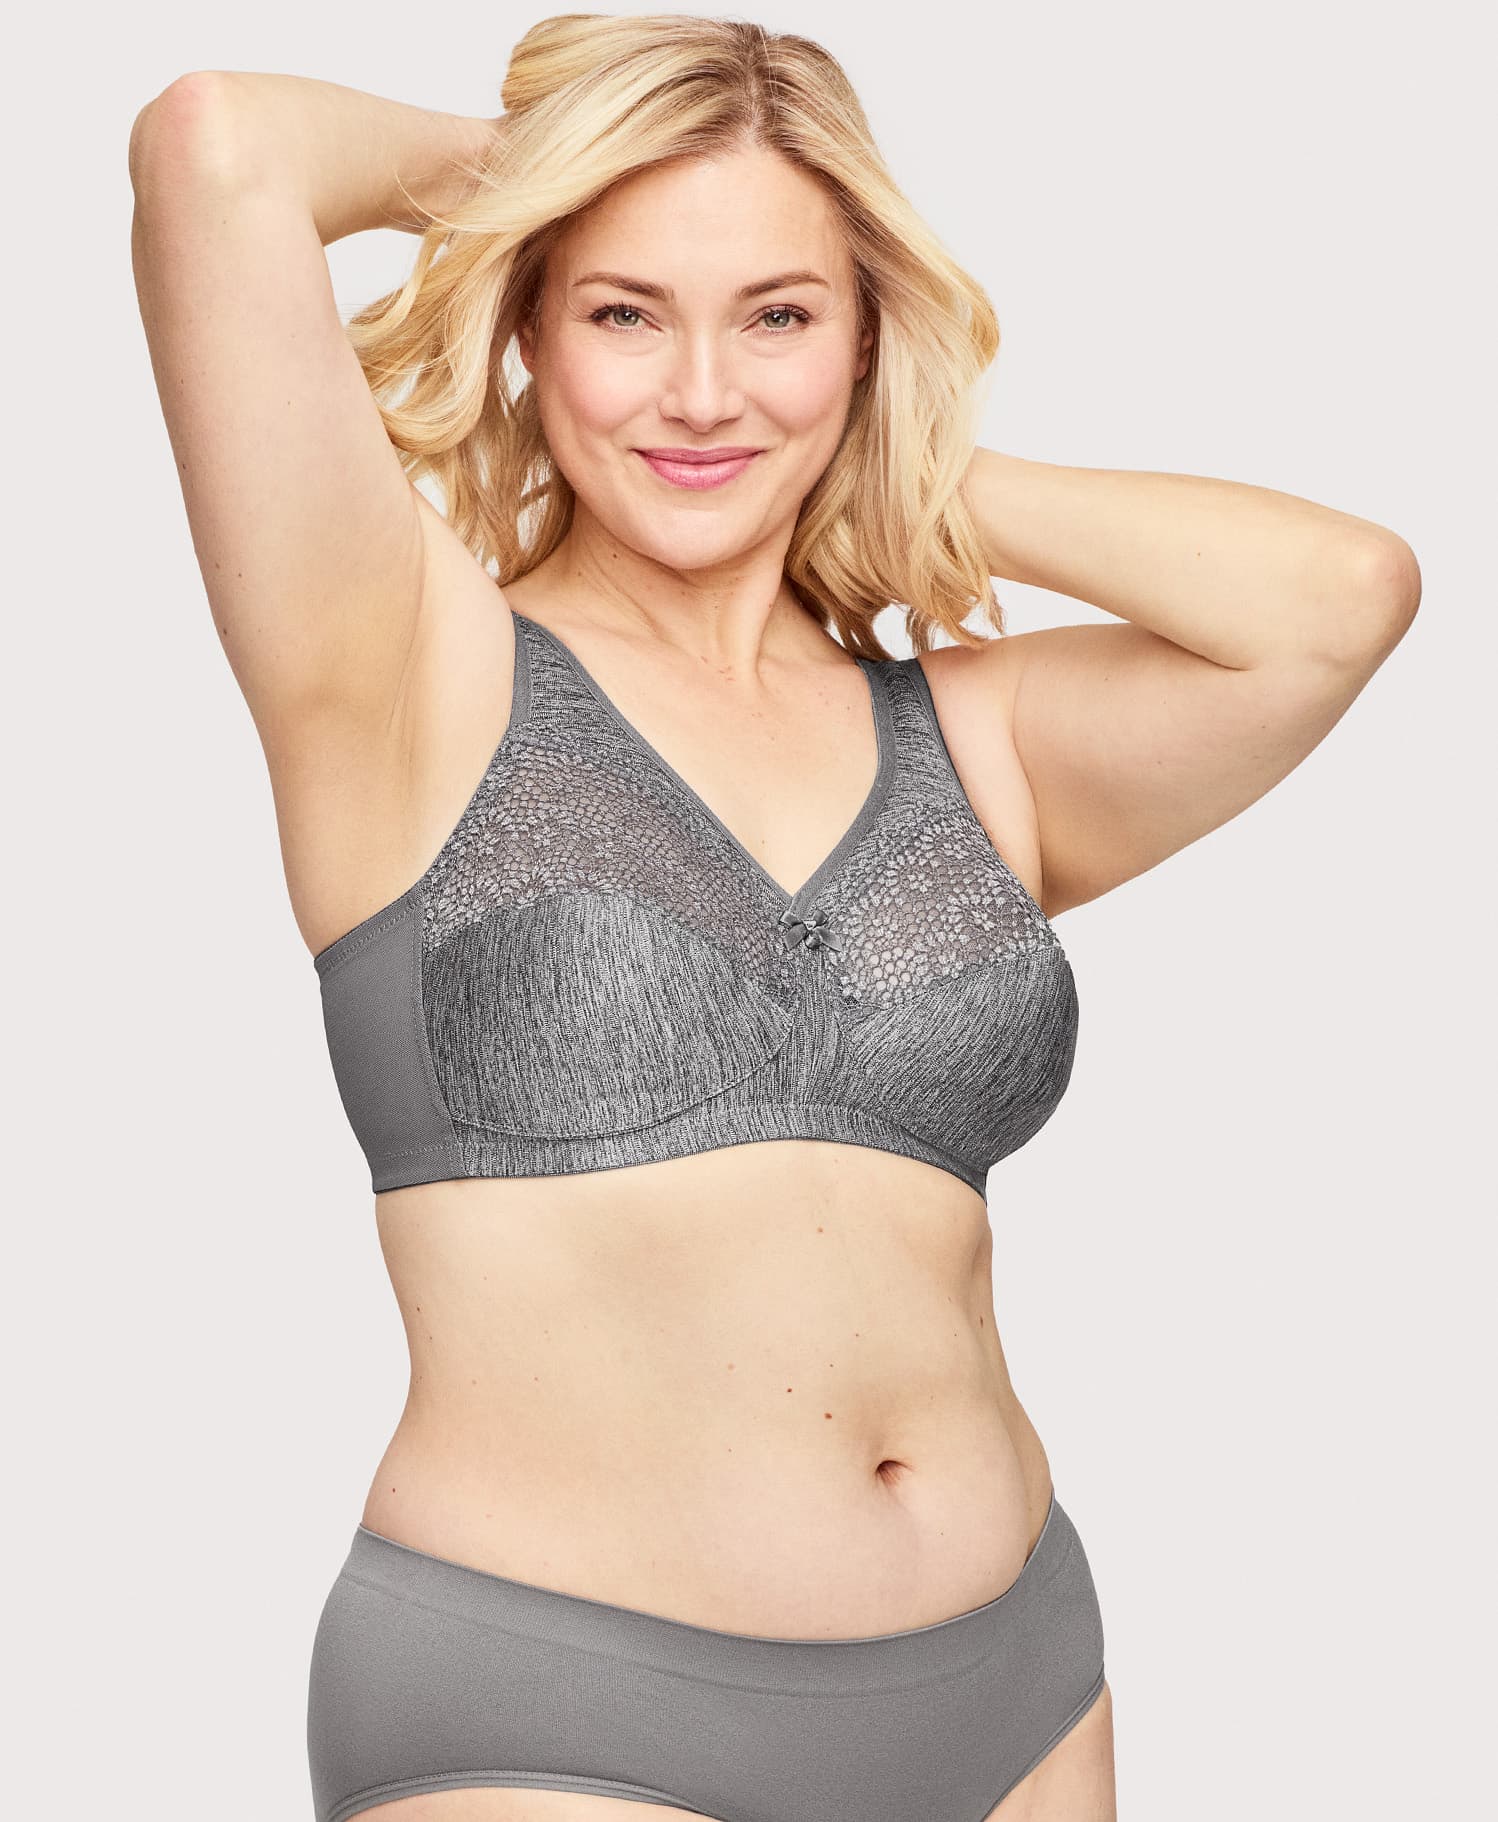 Get ready to slay in our MagicLift Modal Wireless Bra this